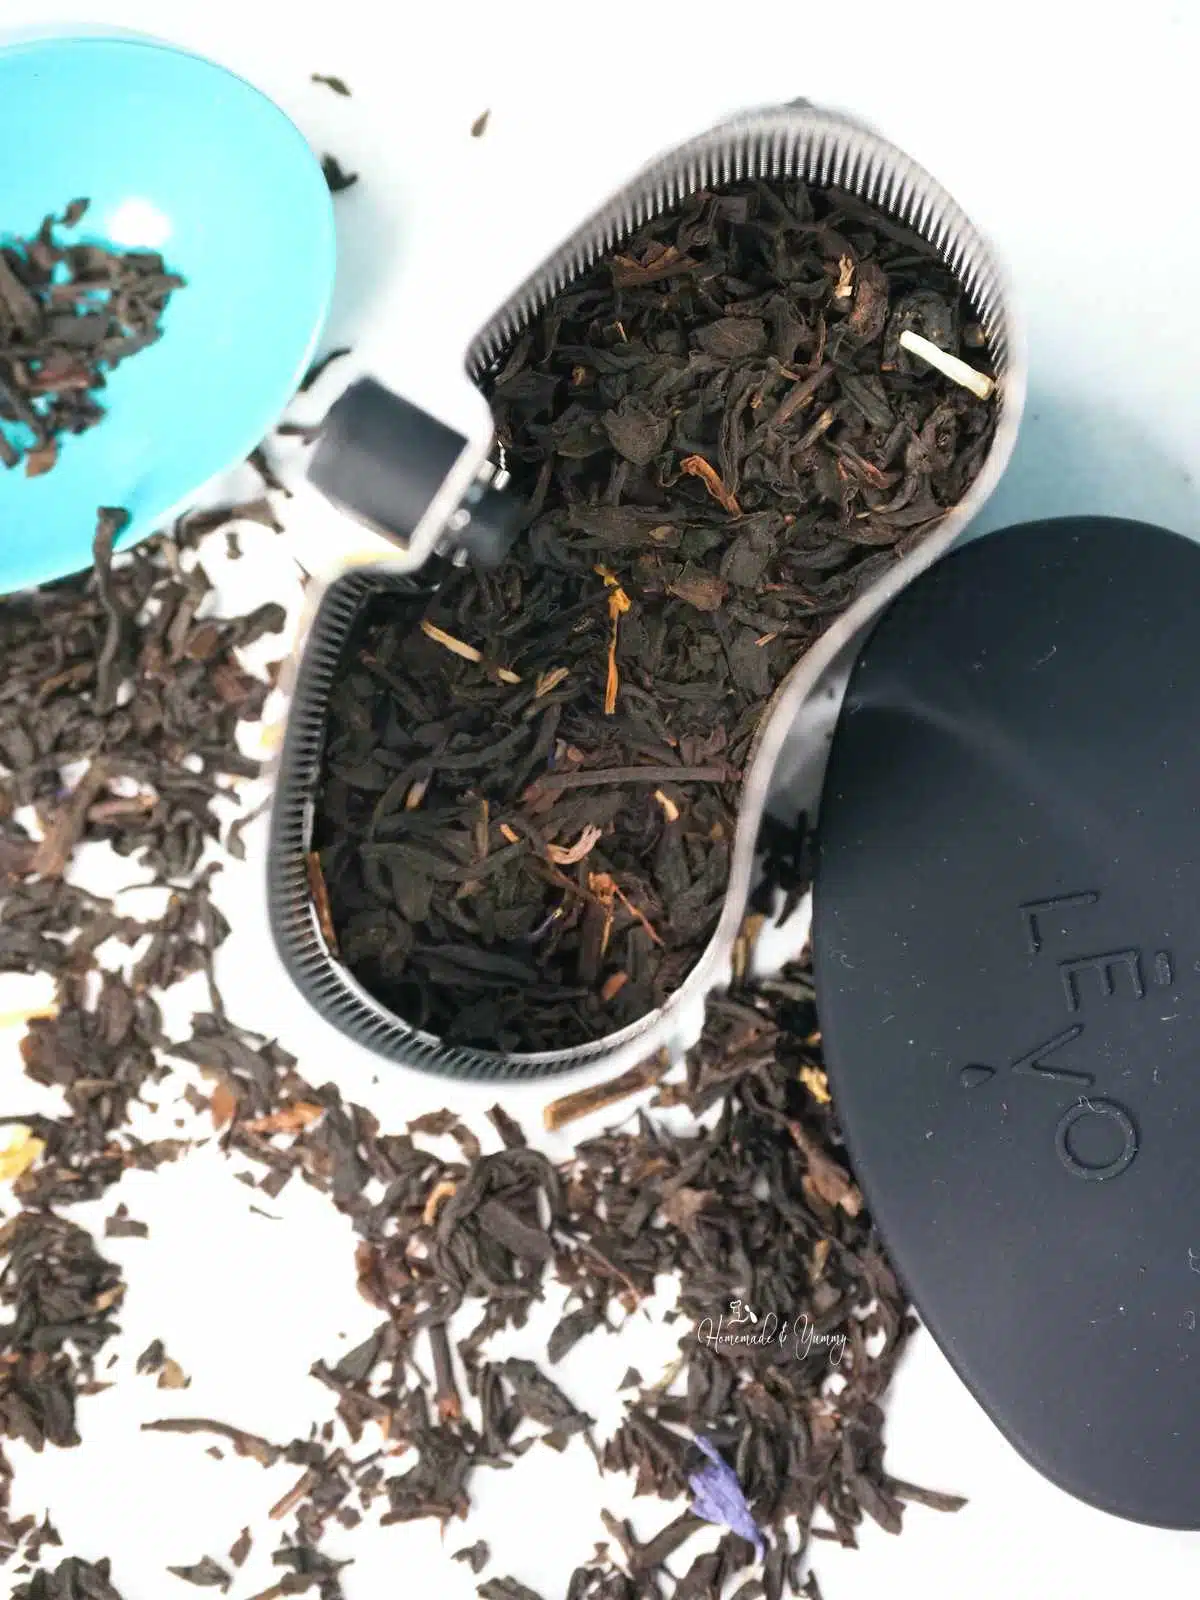 Loose tea placed in the herb pod